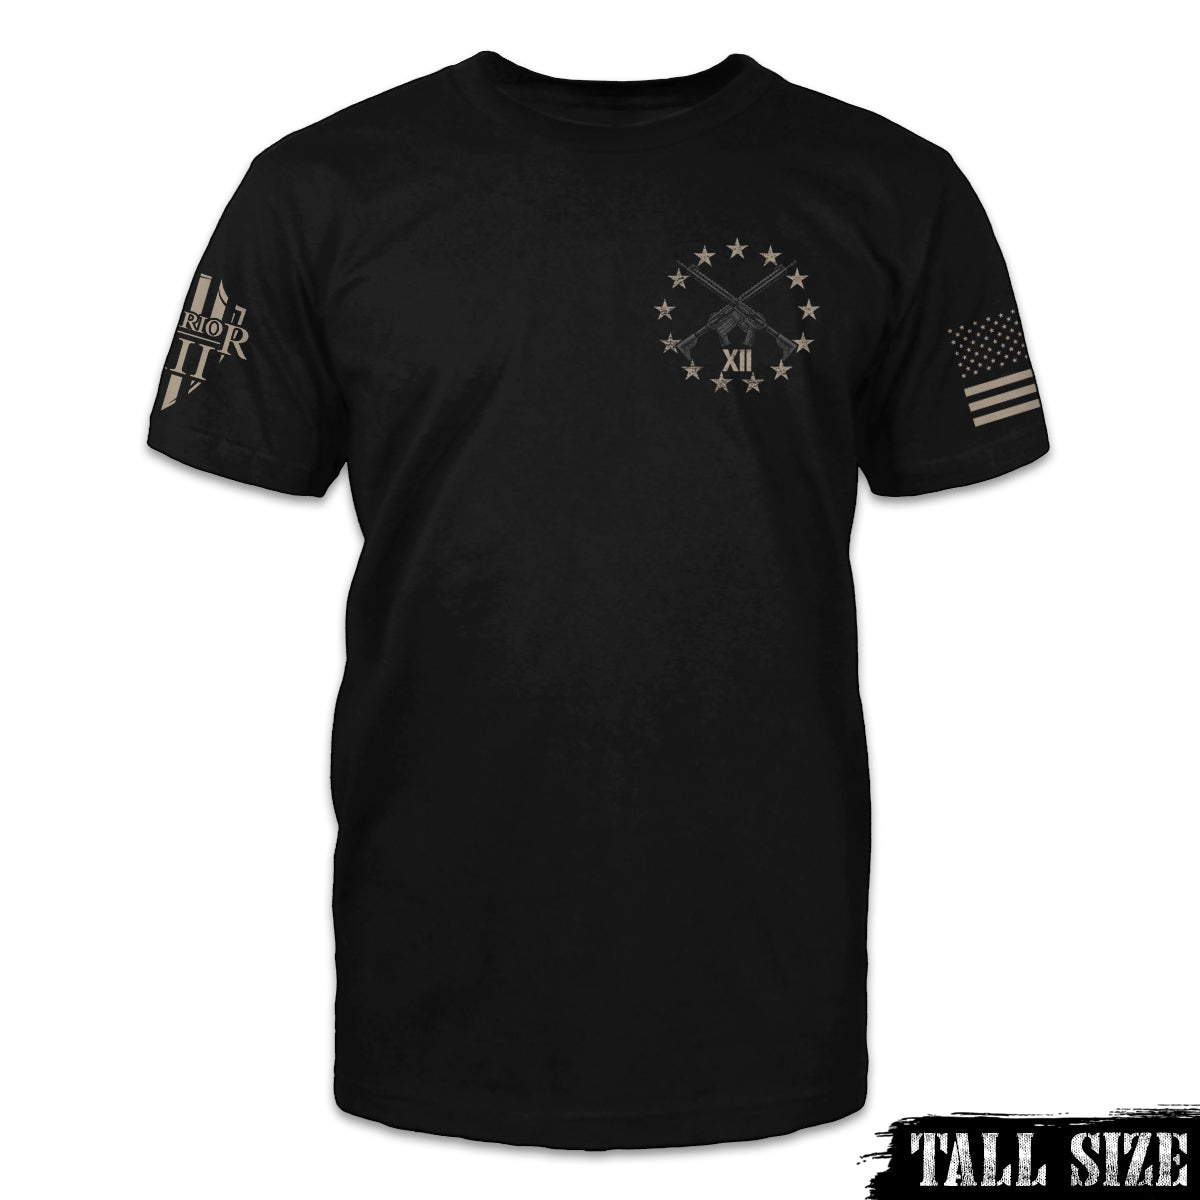 A black tall size shirt with a stars and guns emblem on the front.